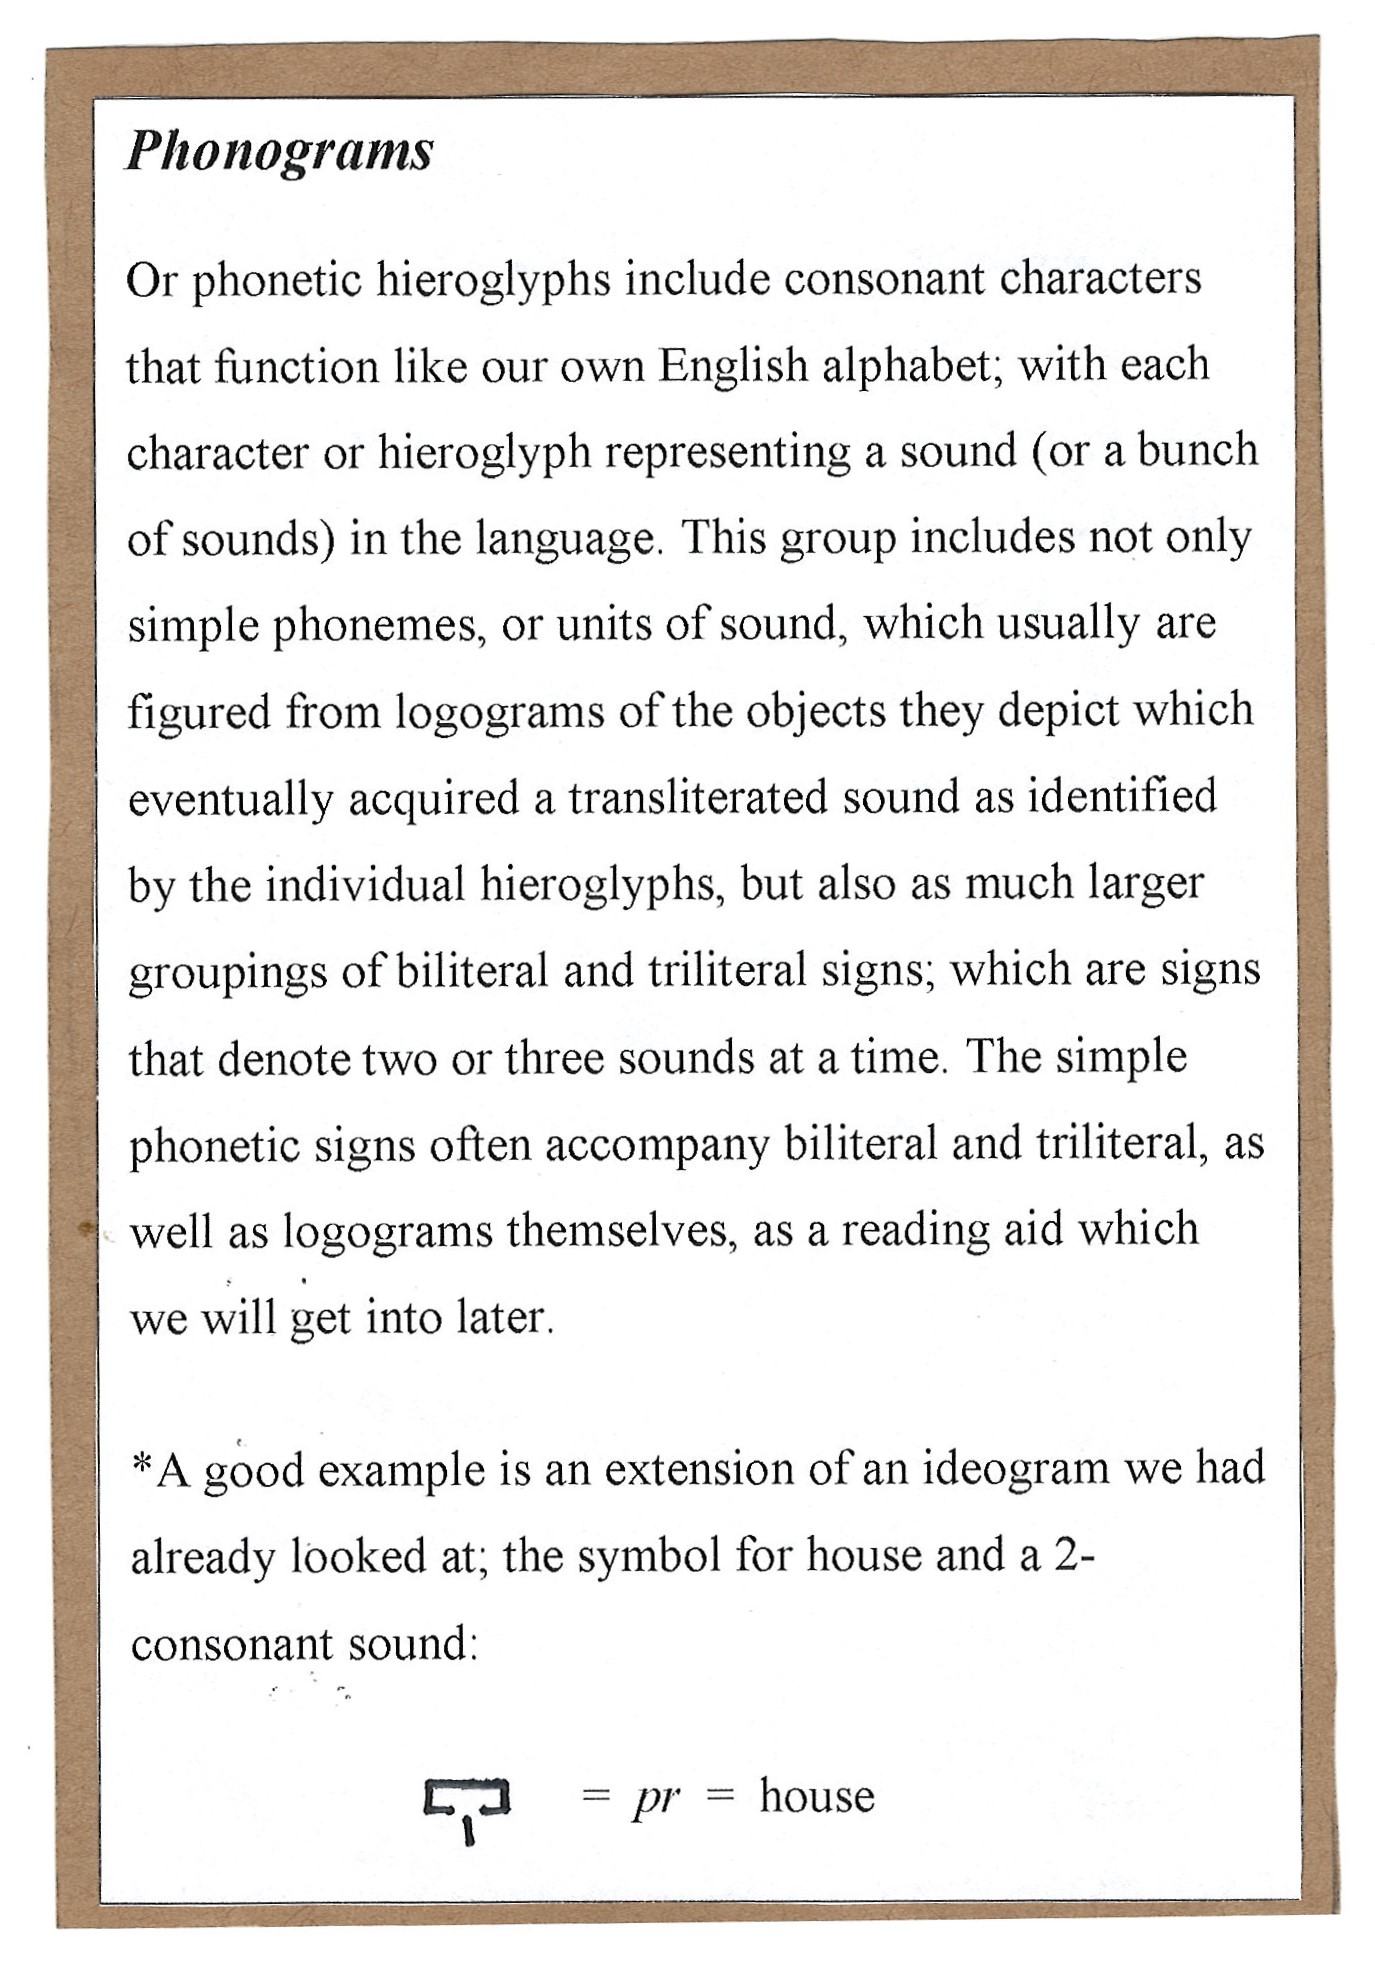 Page3. Phonograms, or the way Egyptian Hieroglyphics incorporate a phonetic sound structure to add more to their supremely visual alphabet.